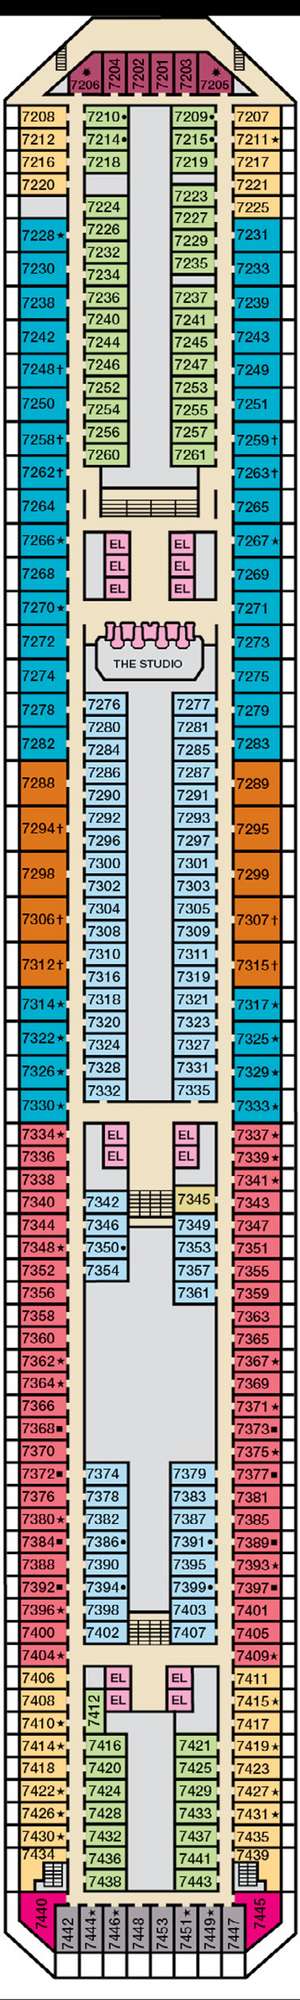 Deck plan for Carnival Conquest